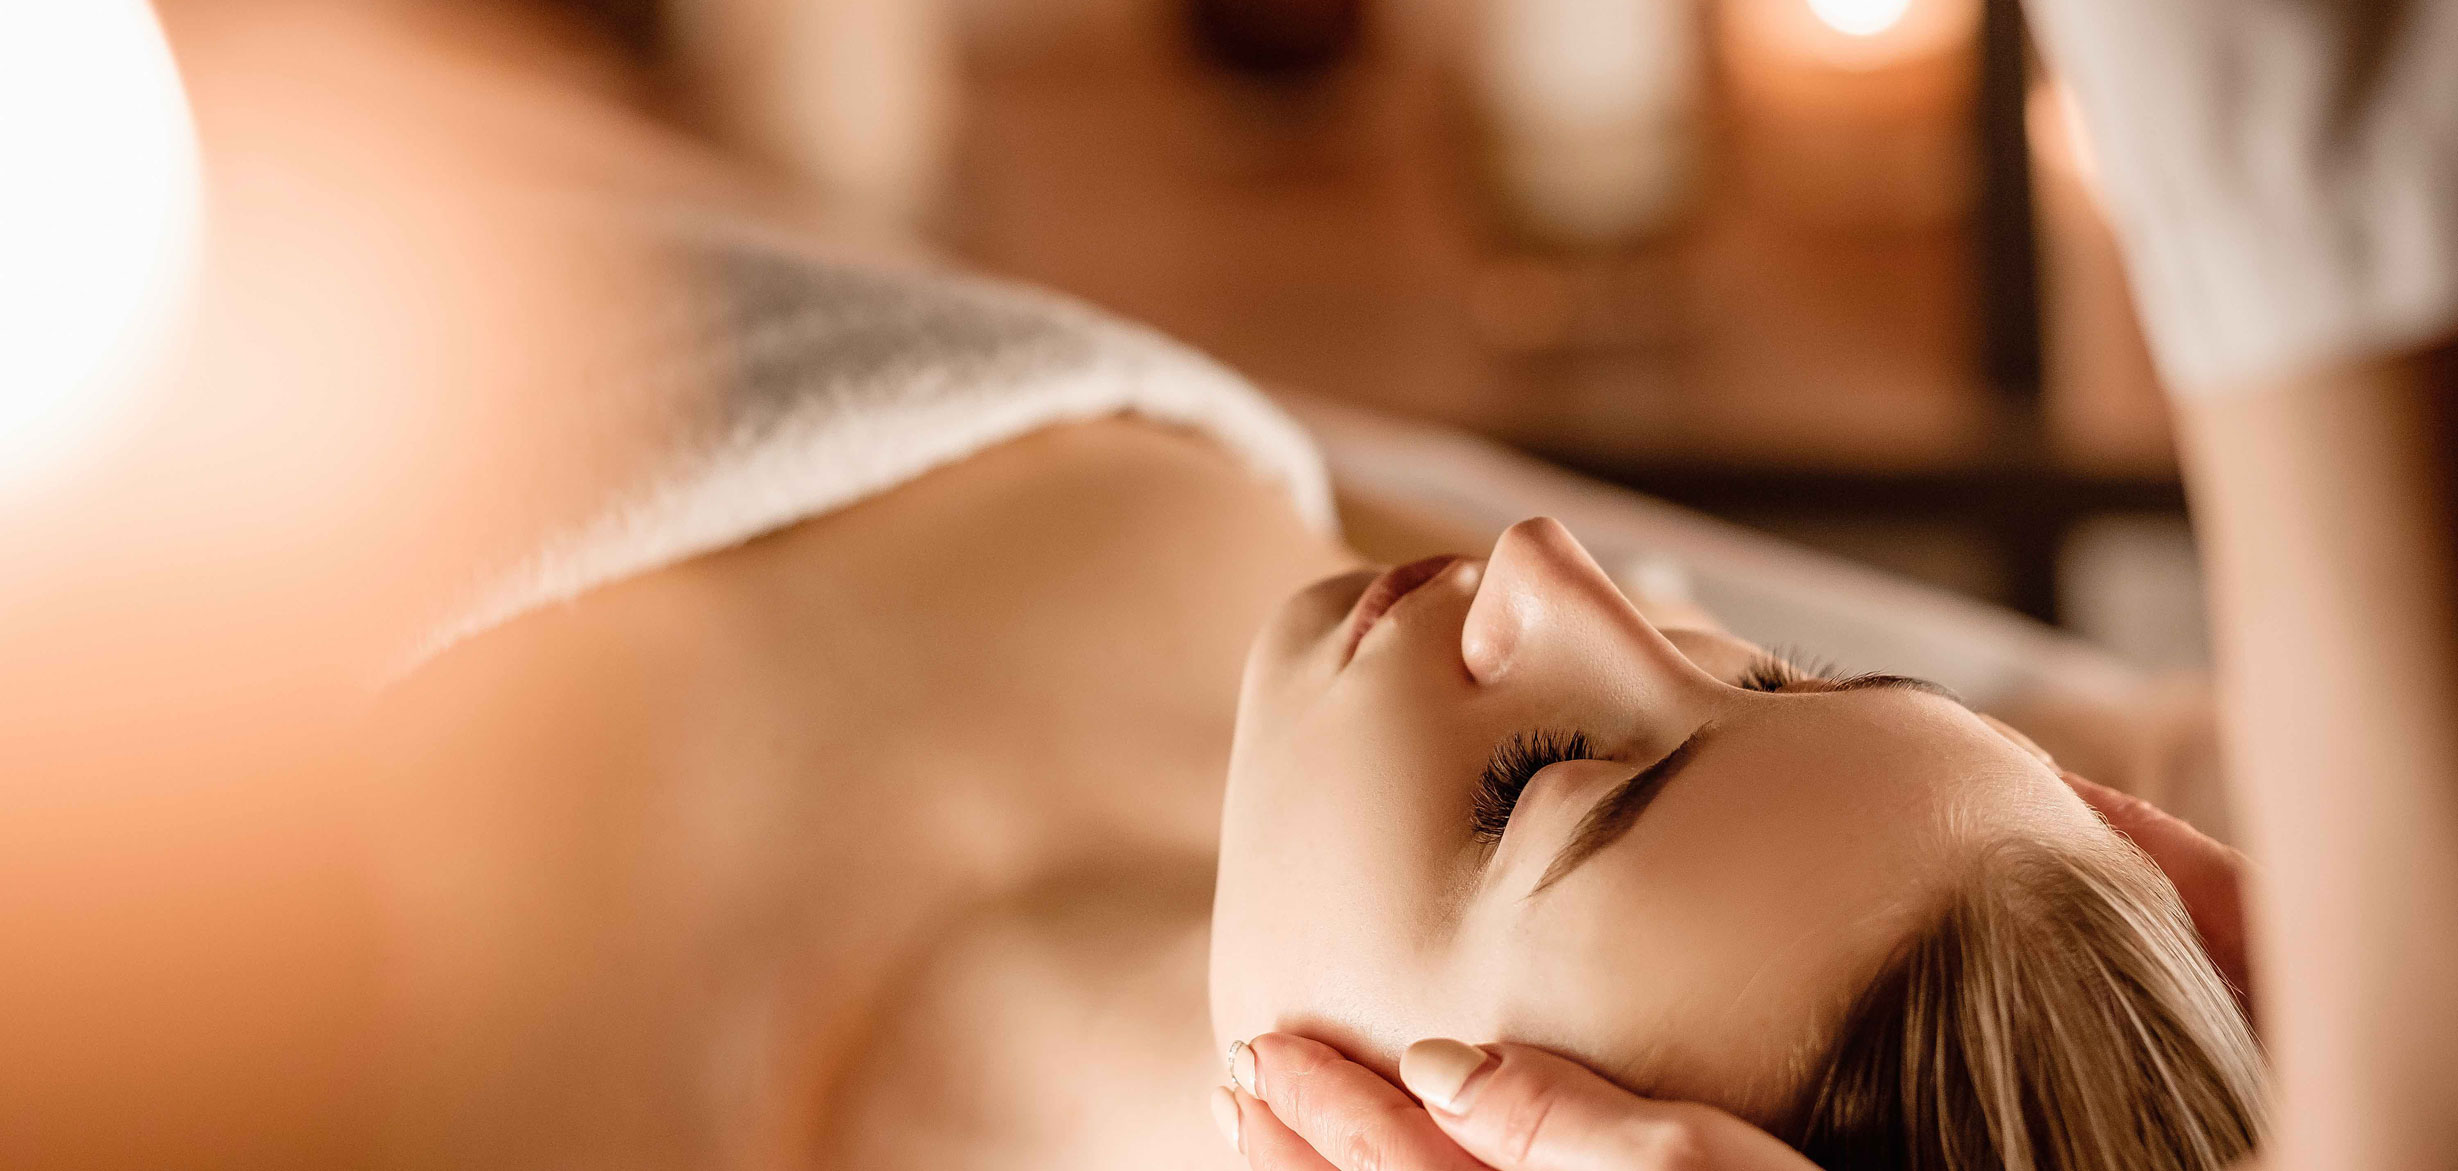 Romancing the Spa. Relaxation and Rejuvenation in Toronto’s Favorite Spa. For this and other specials, check our Offers page